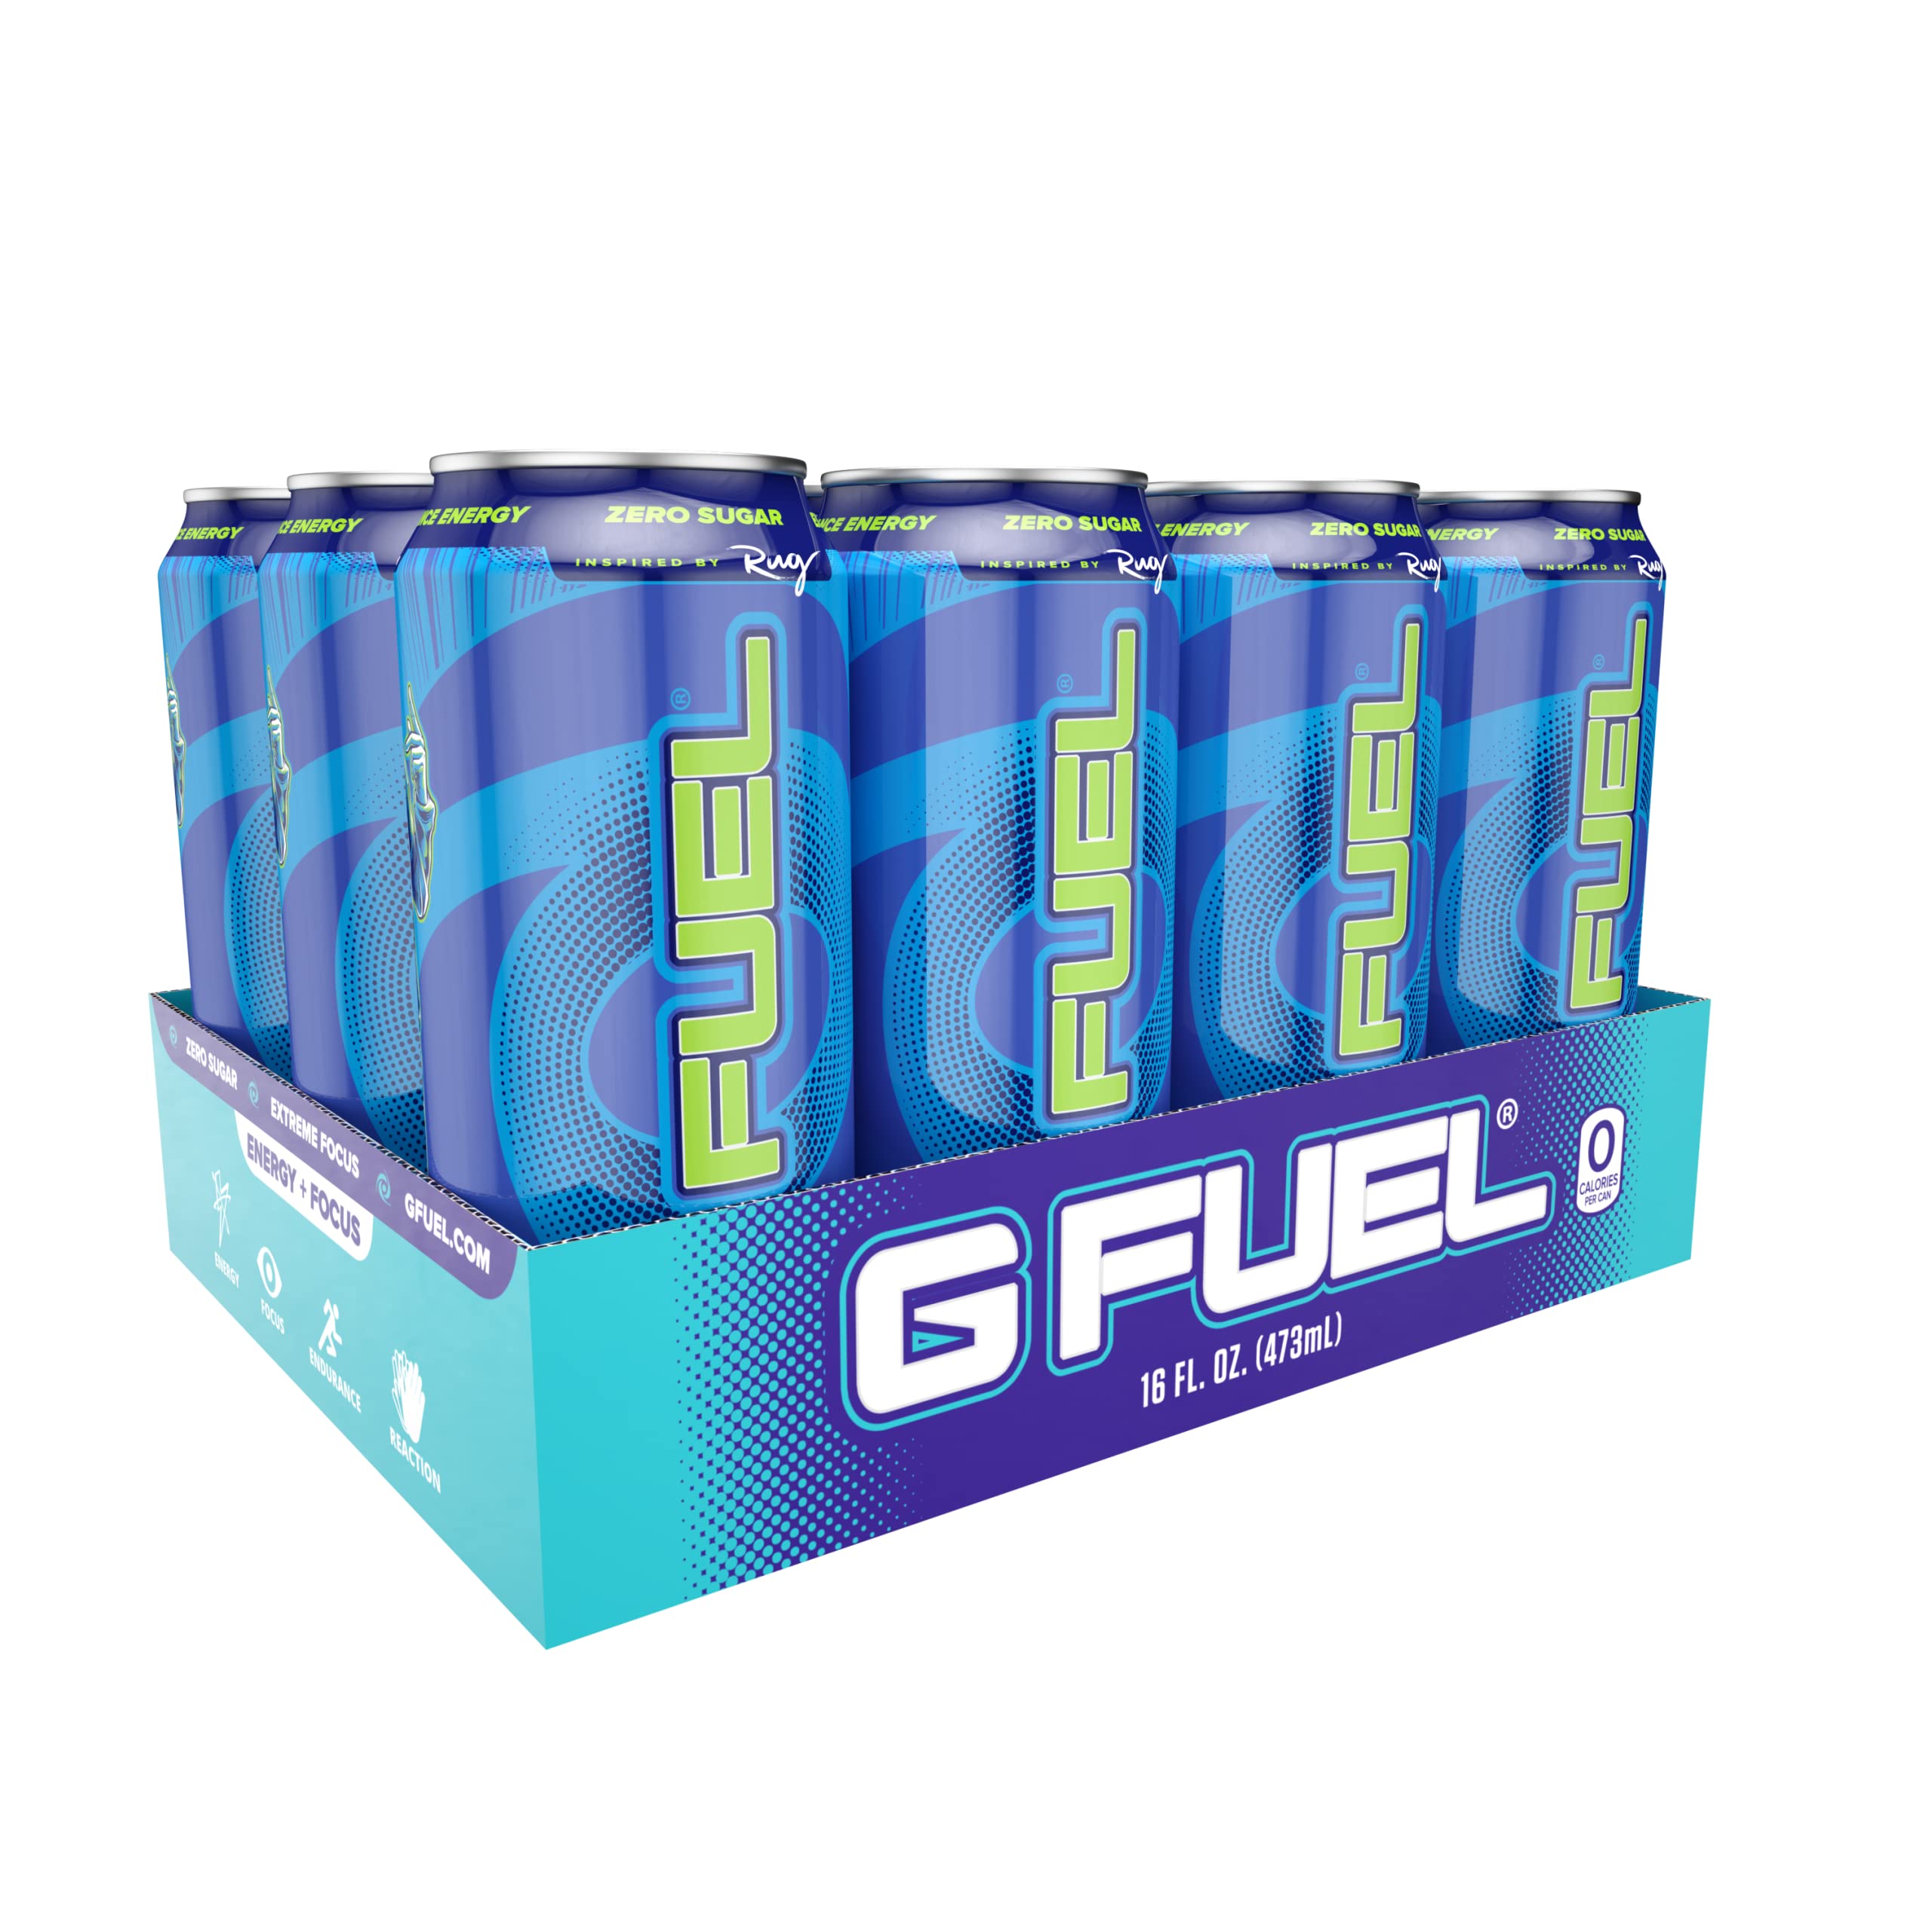 12-Pack 16-Oz G Fuel Sour Blue Chug Rug Sugar Free Energy Drink $15.80 w/ S&S + Free Shipping w/ Prime or on orders over $35